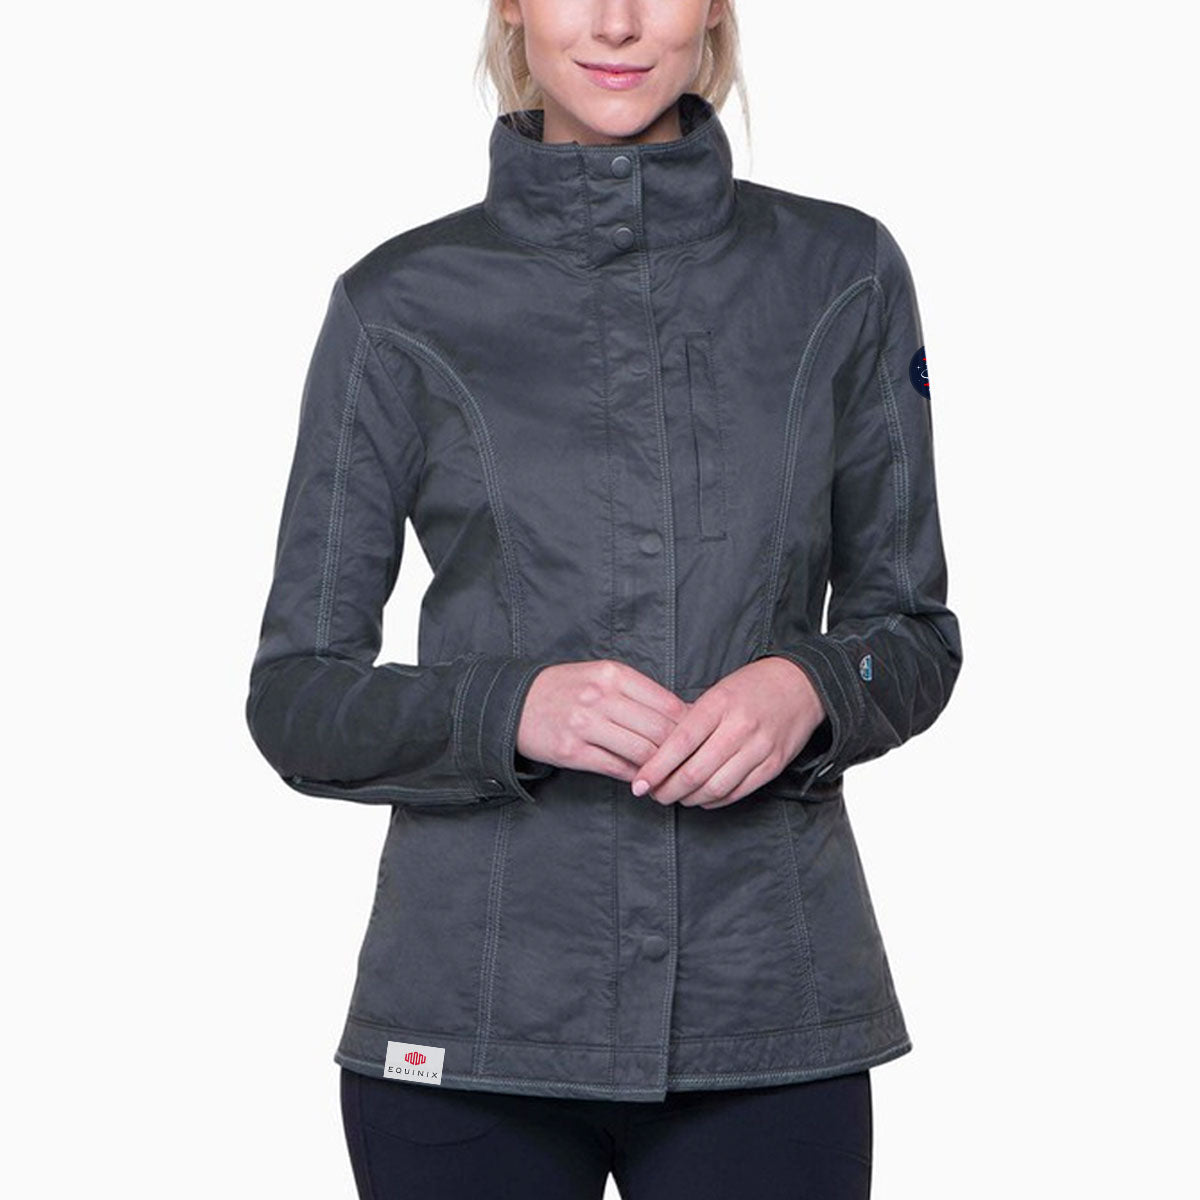 Project Gemini Jacket (Women's Fitted)